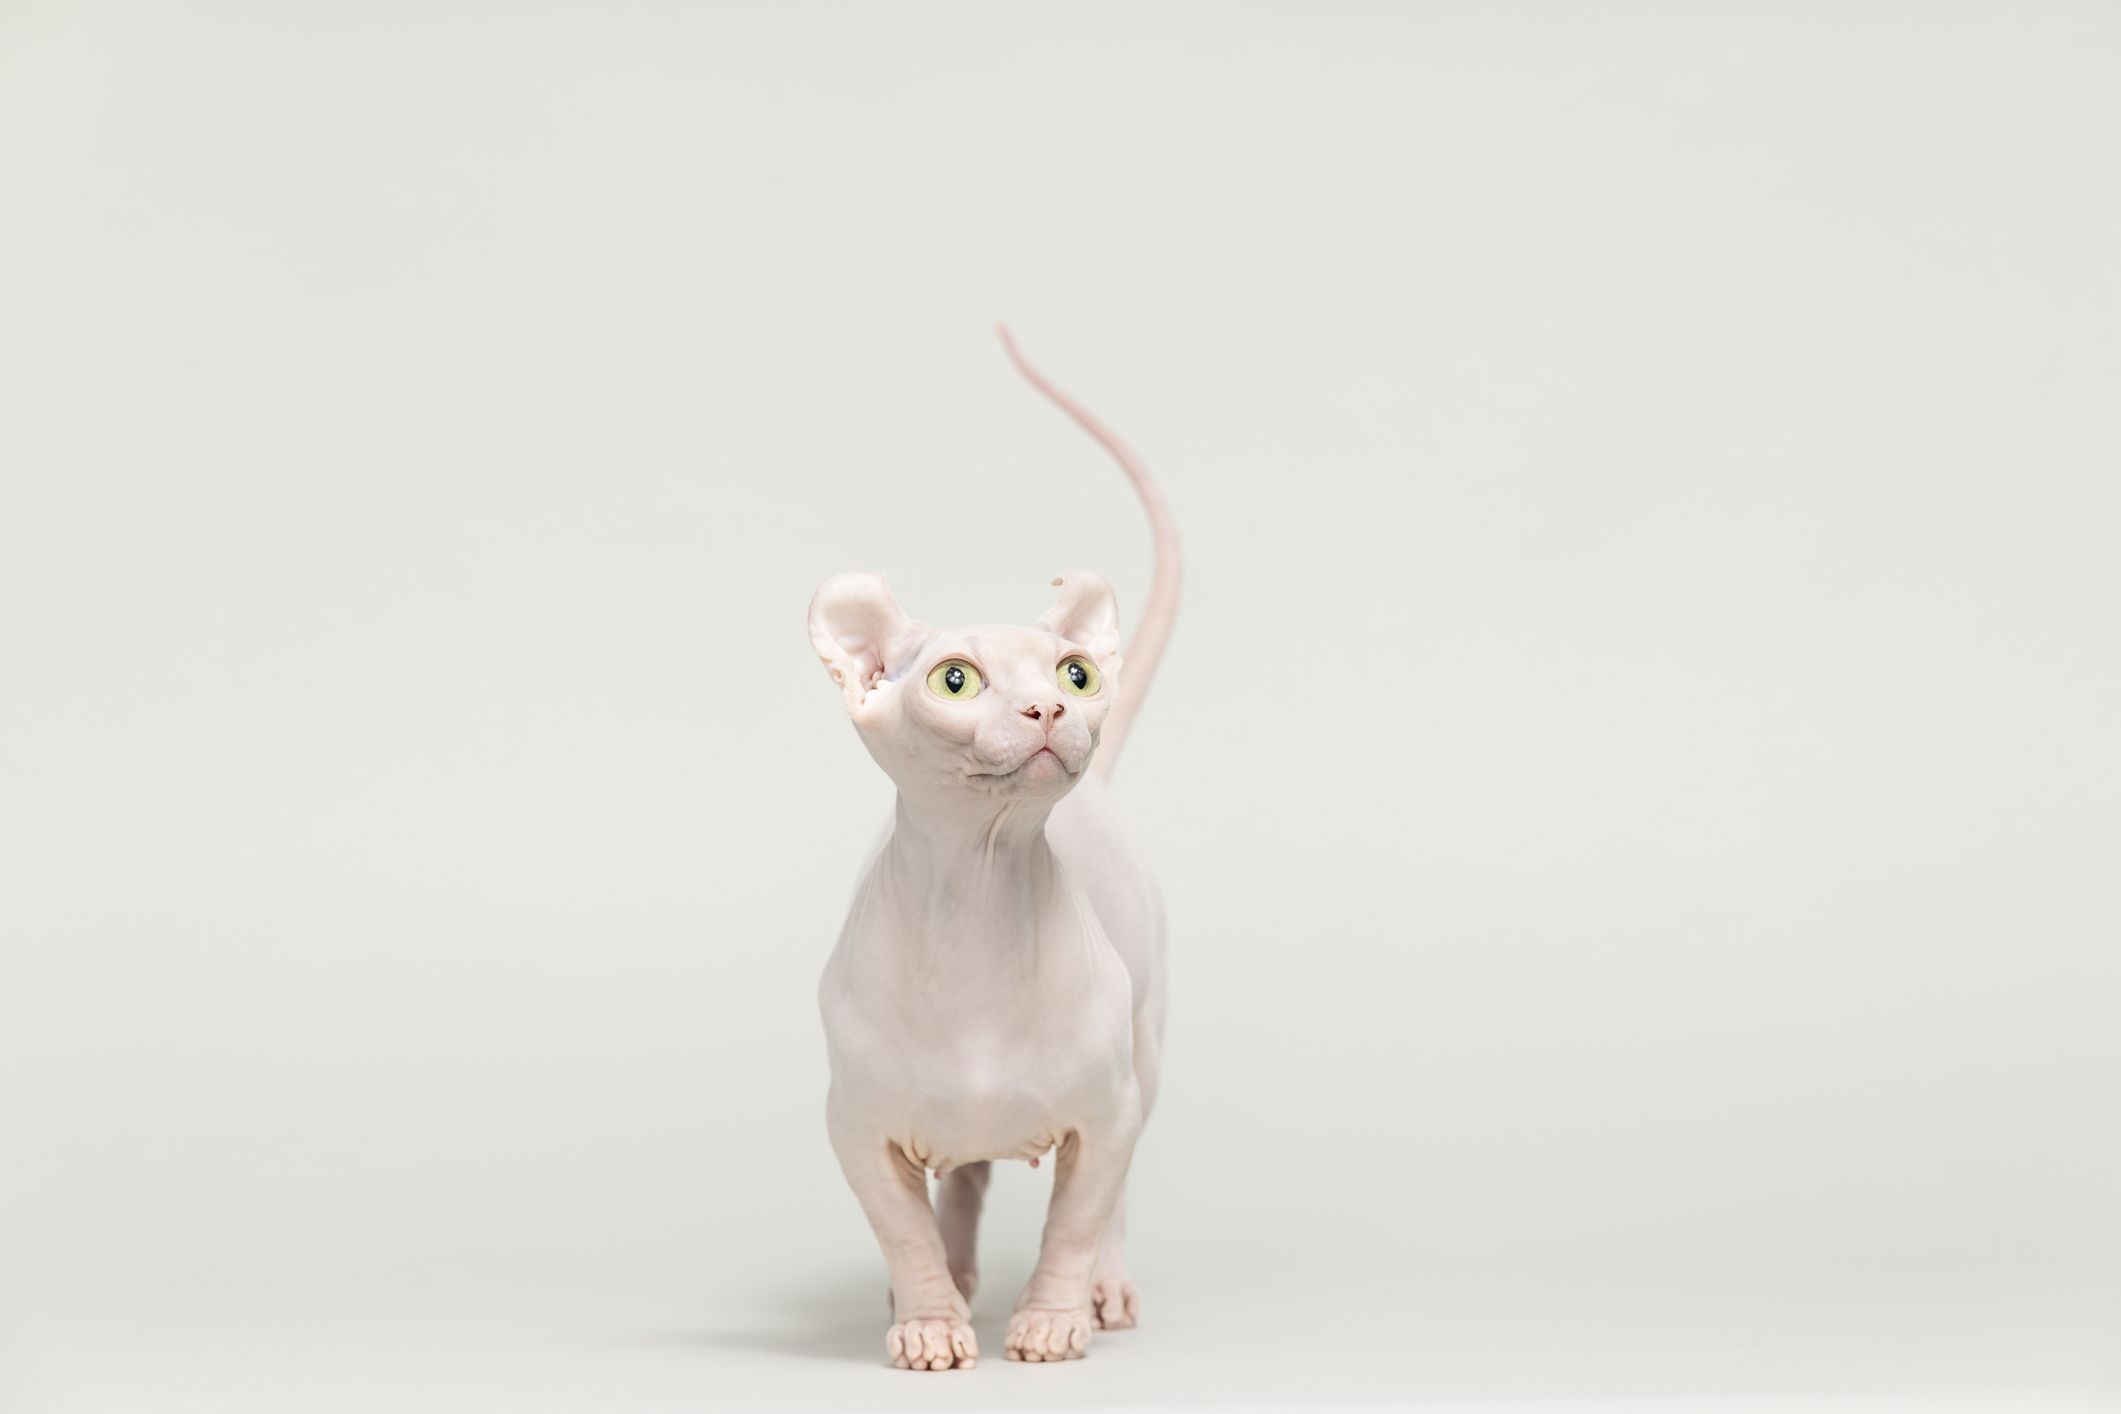 7 Hairless Cat Breeds Sphynx Donskoy And More